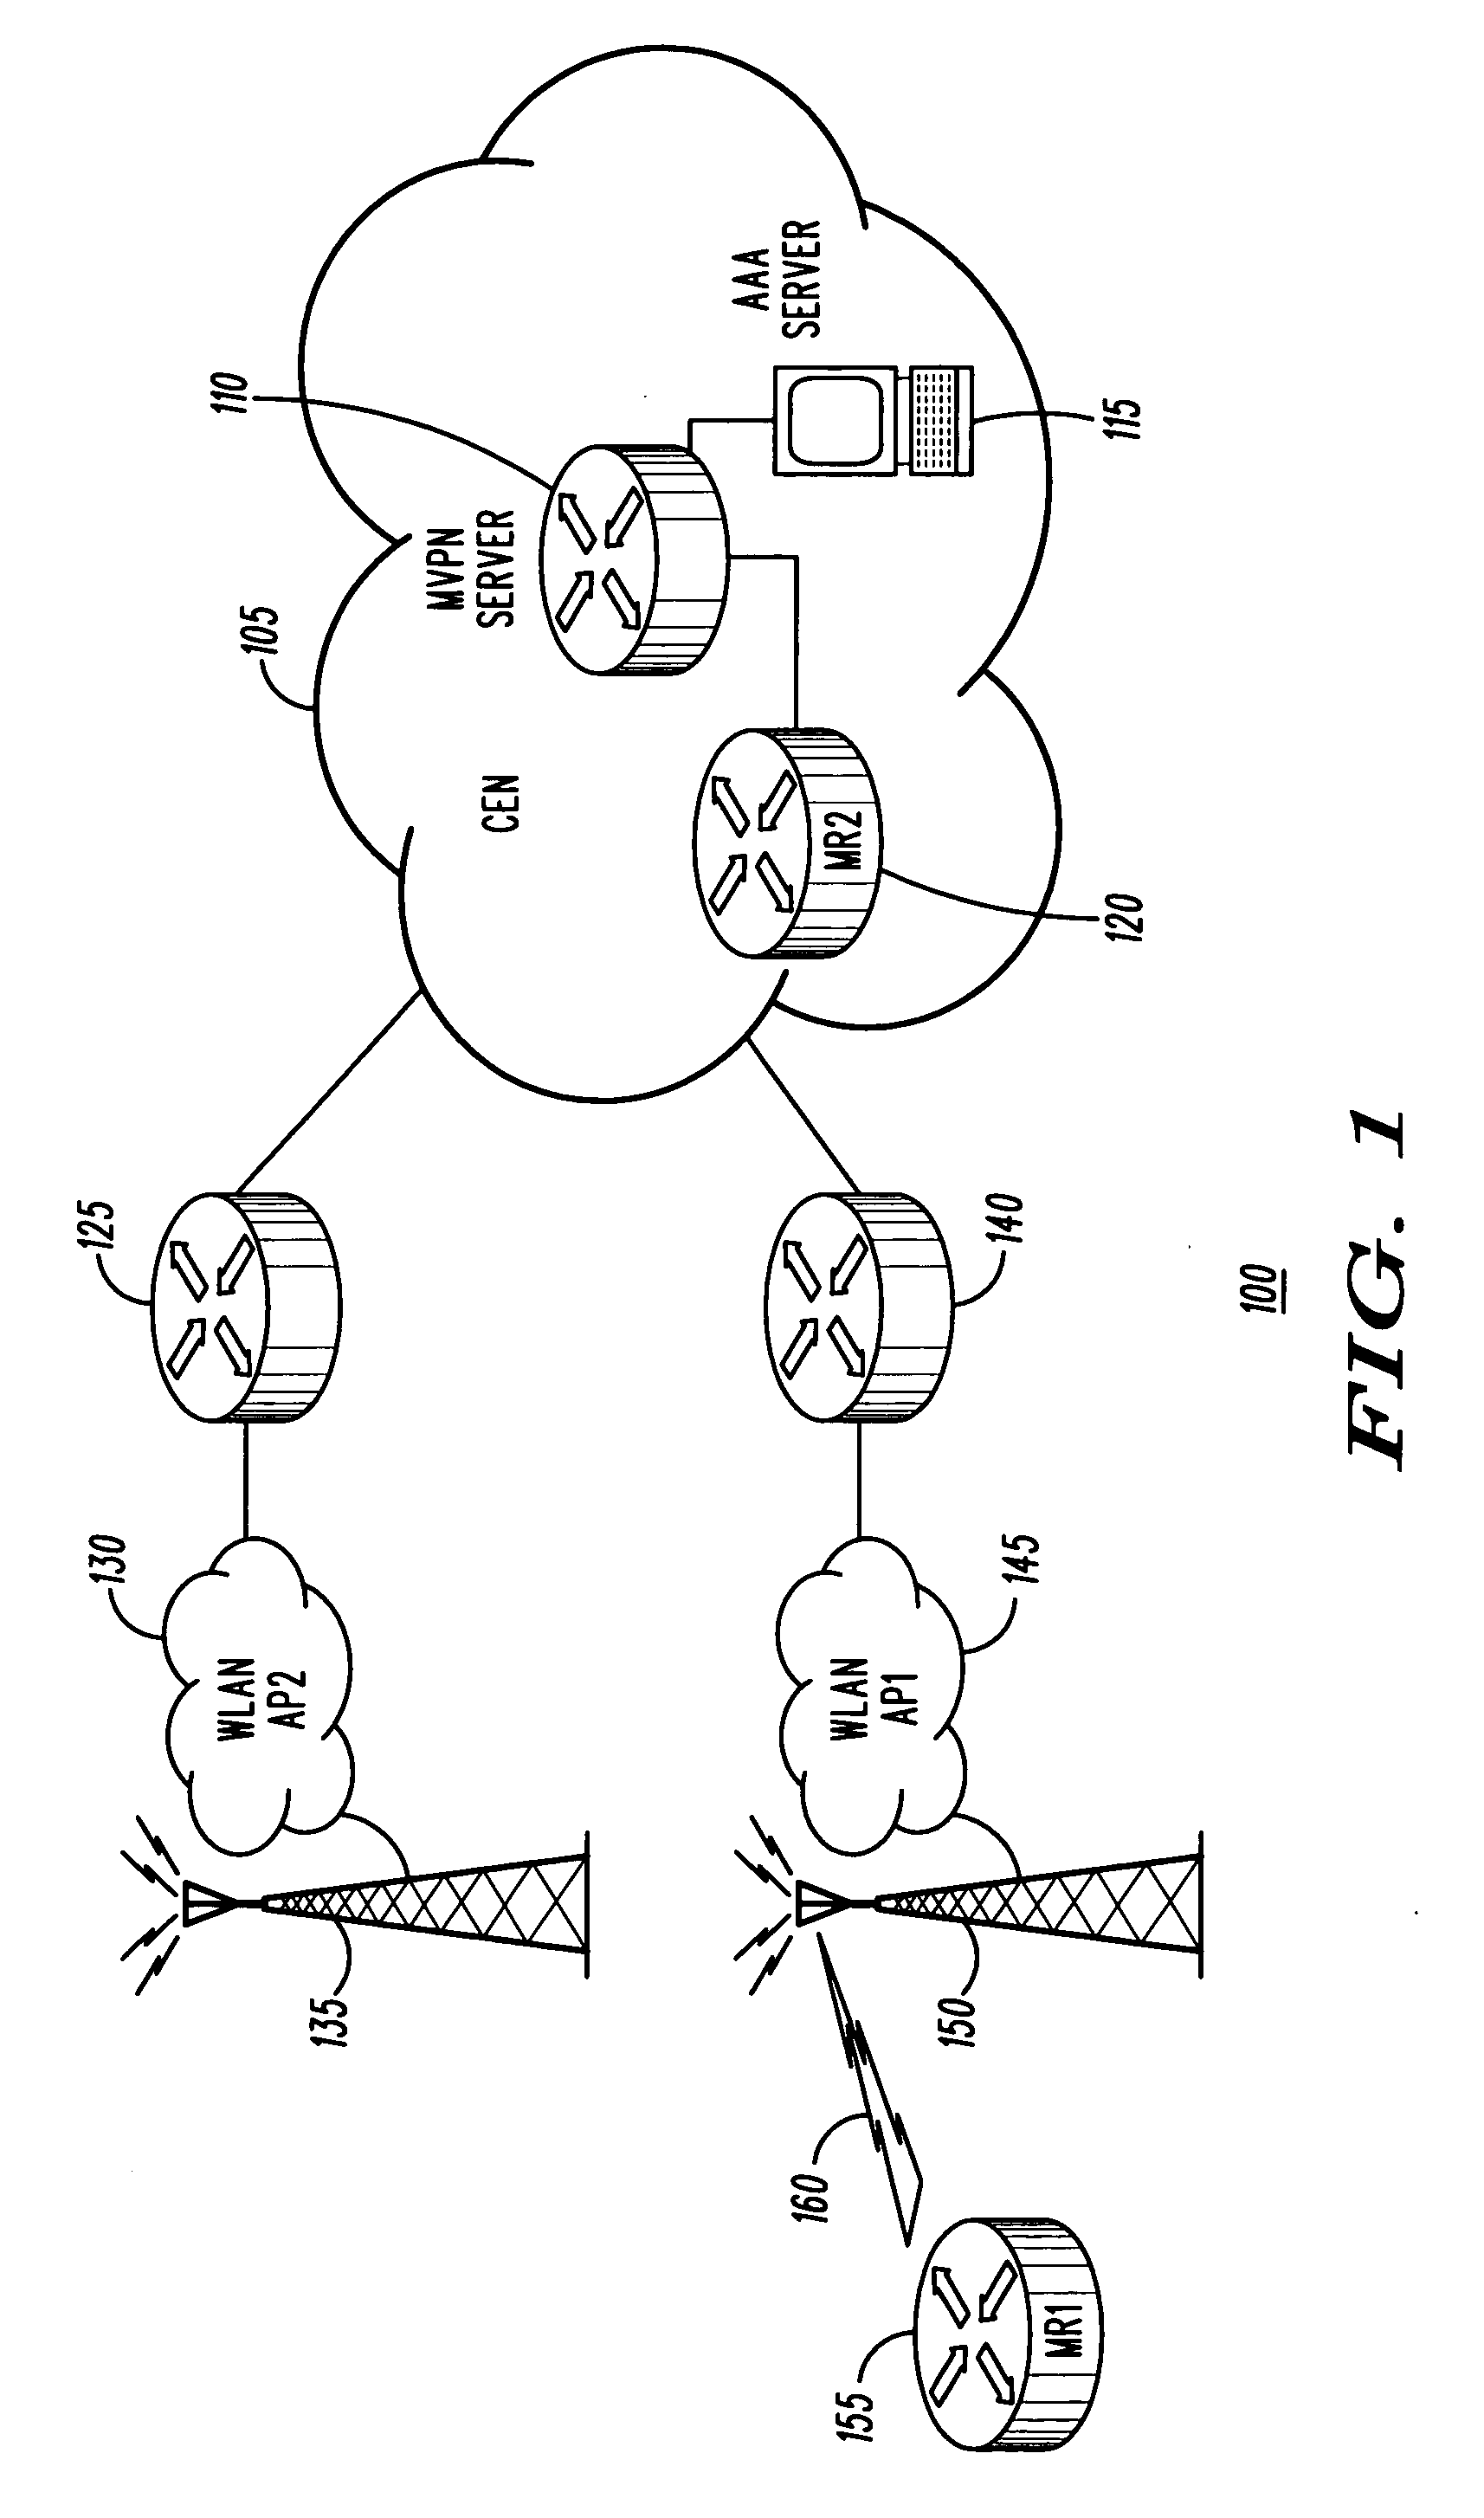 Methods of network access configuration in an IP network